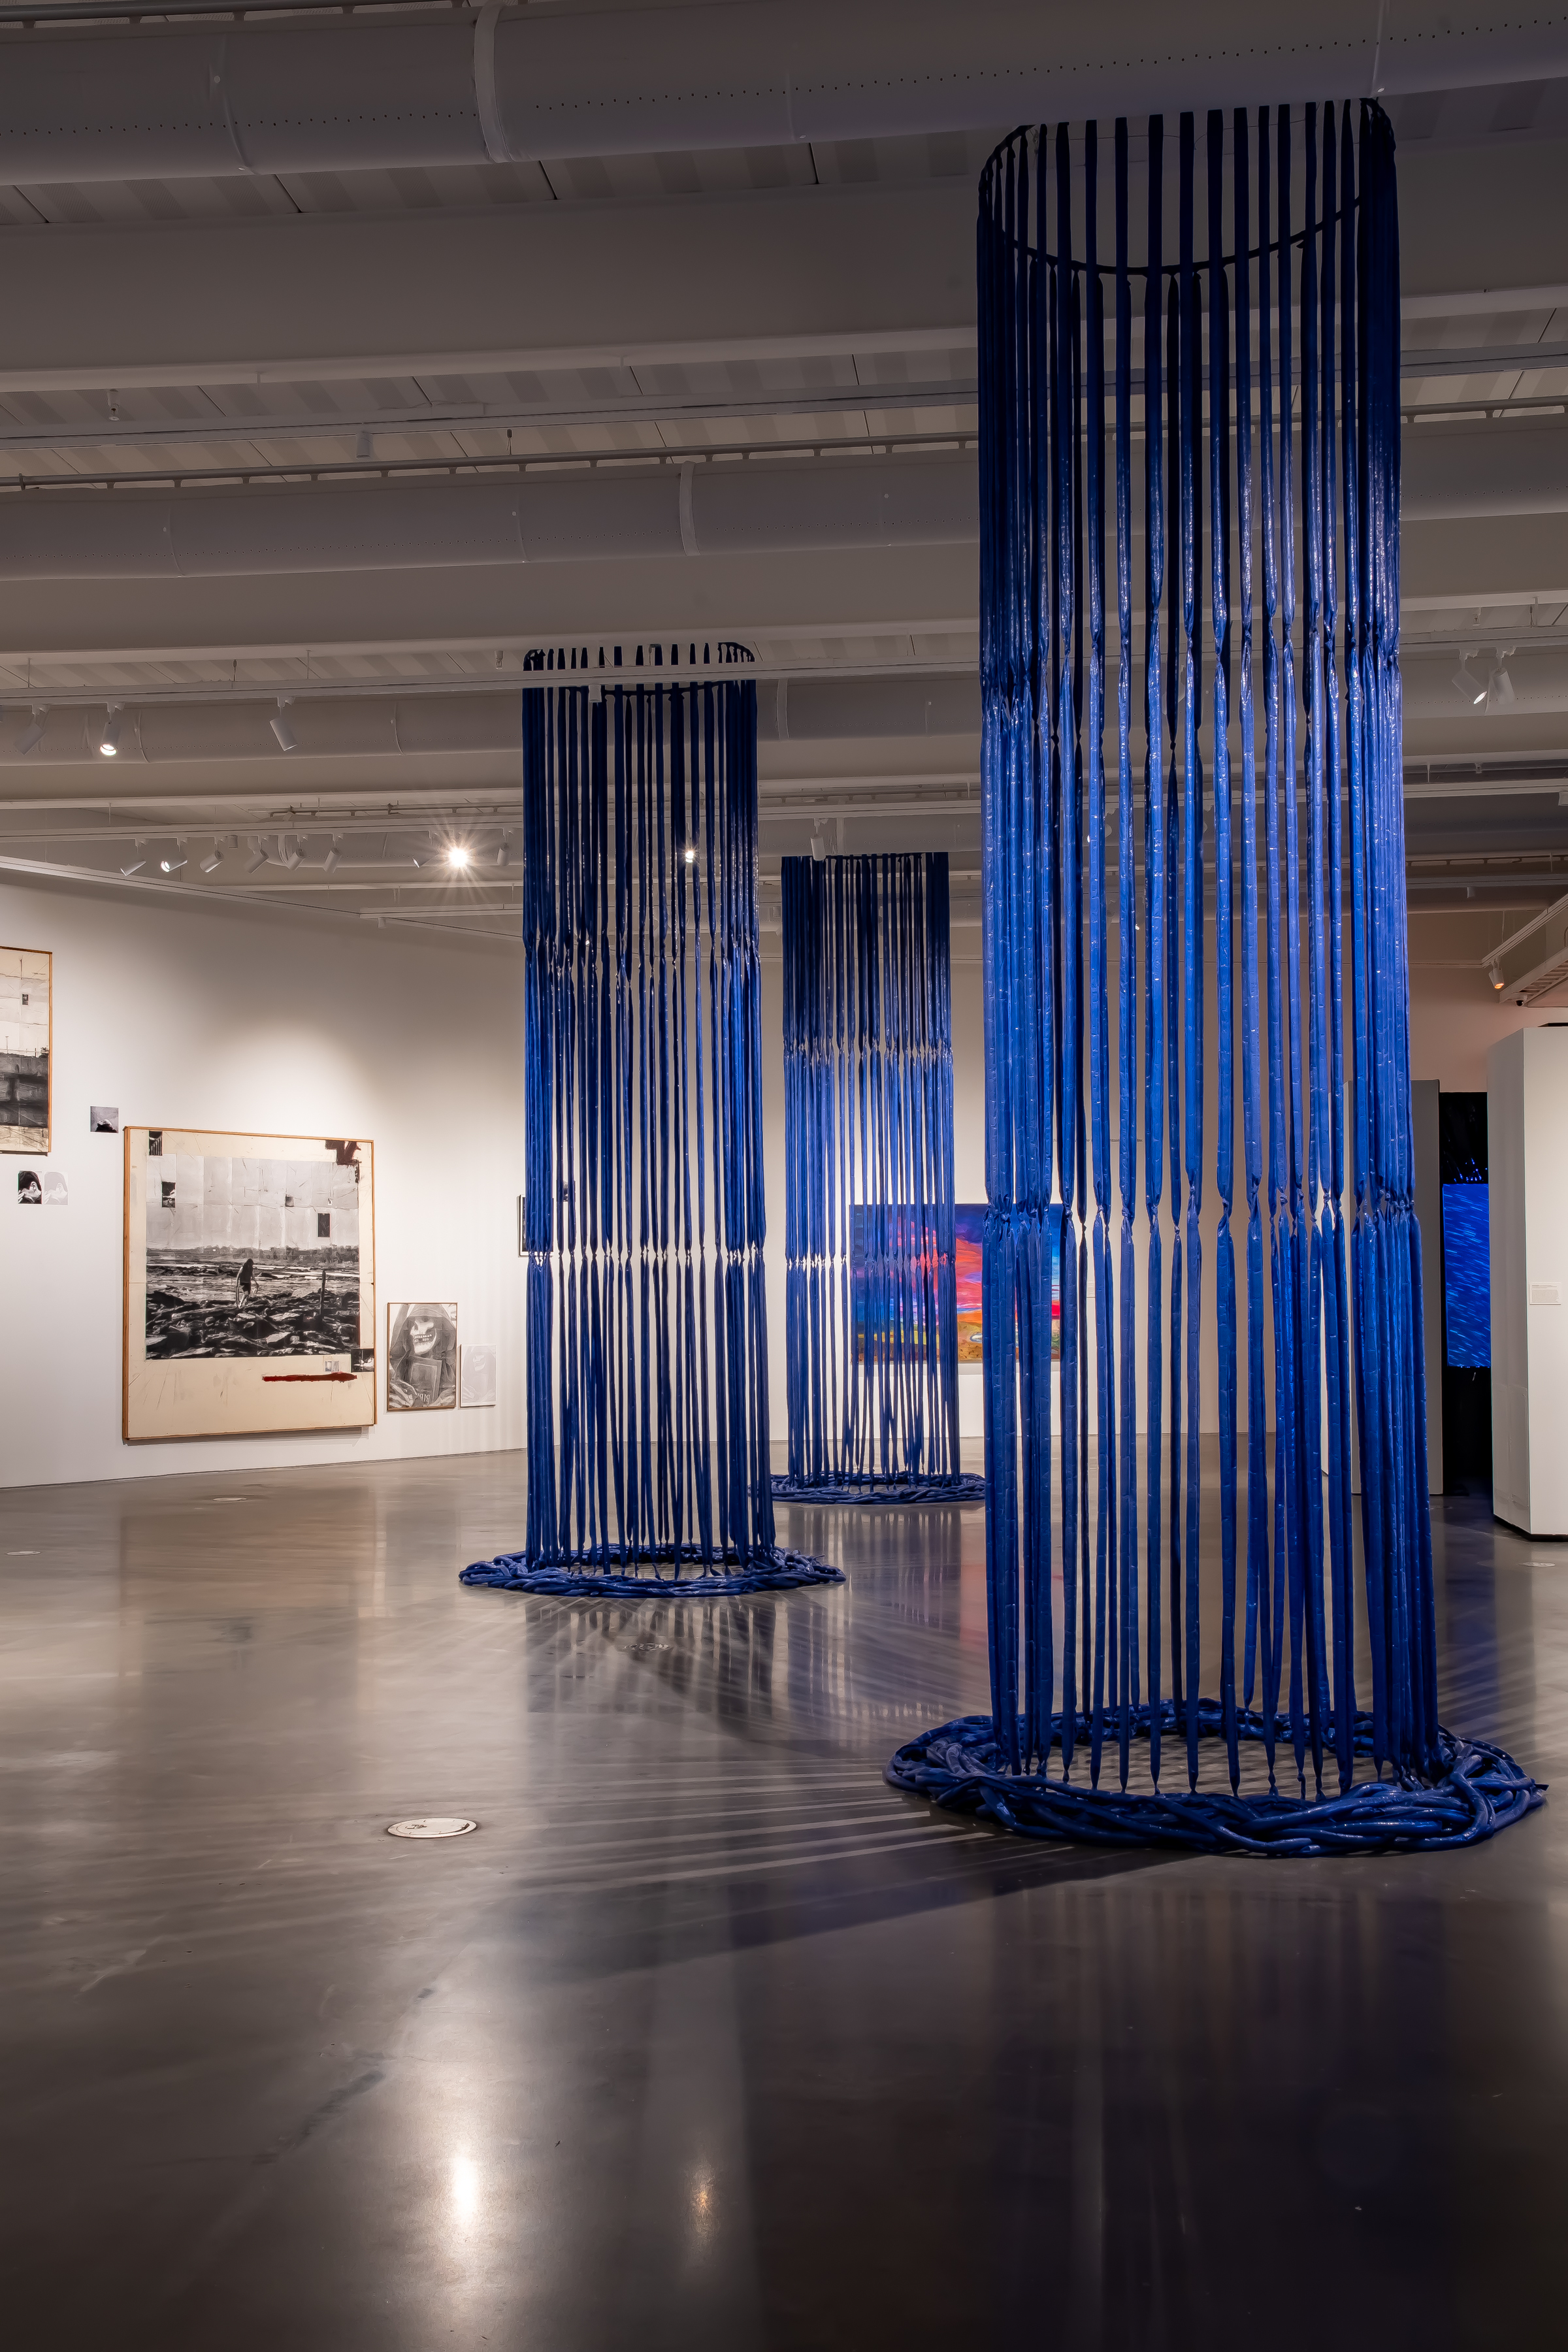 A gallery view shows hanging blue cylinders with large black and white pictures hanging on the wall behind